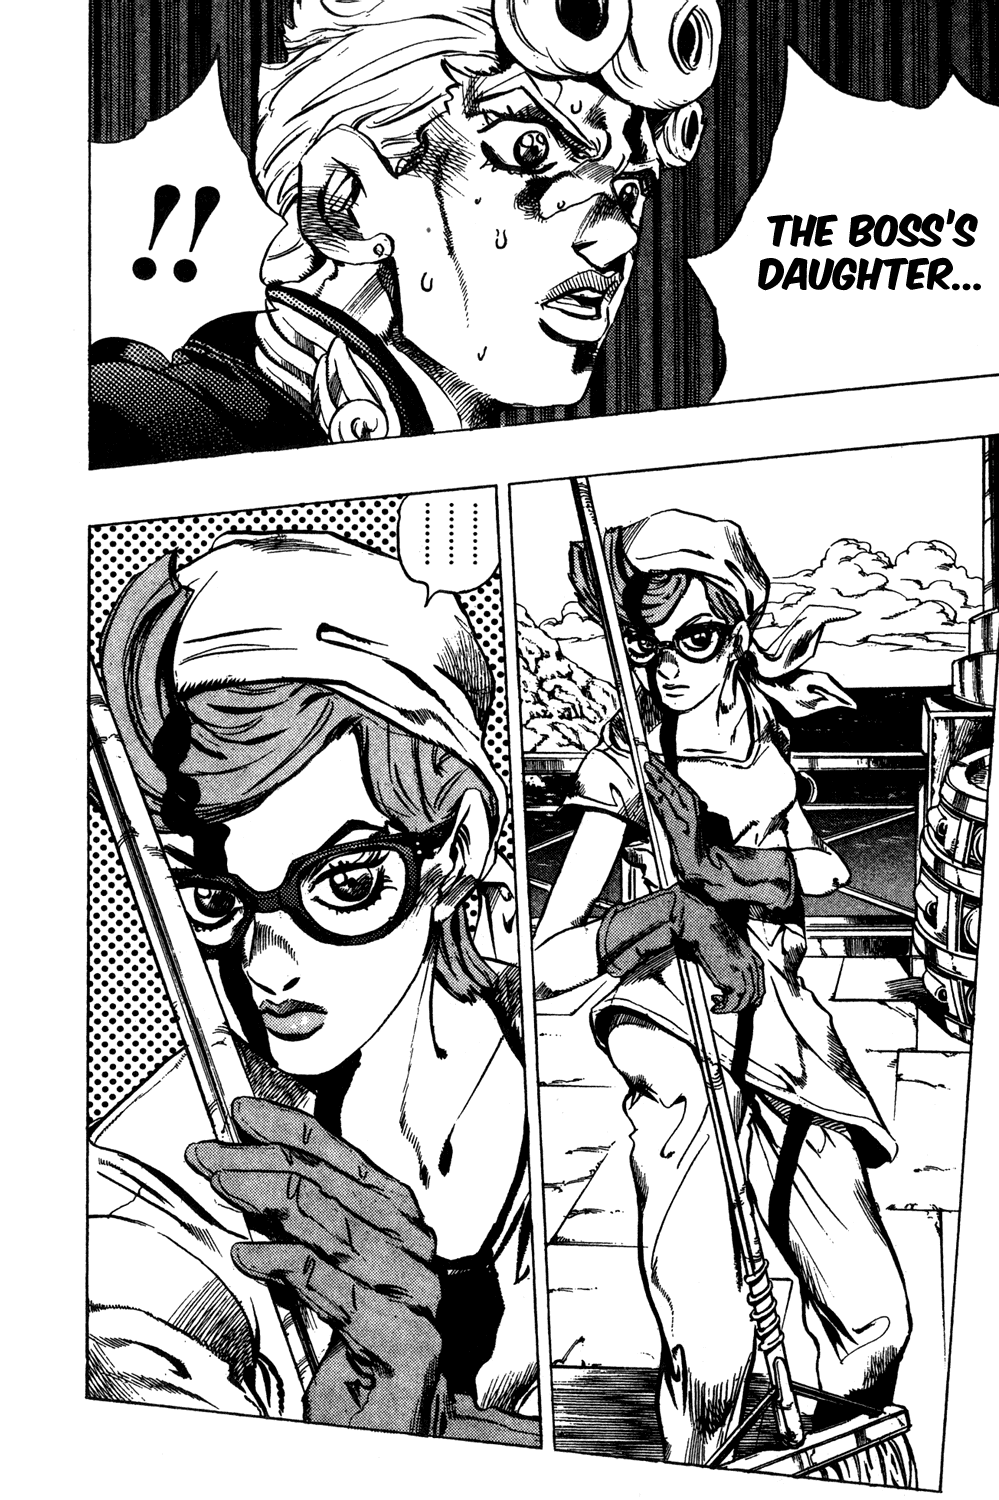 Jojo's Bizarre Adventure Part 5 - Vento Aureo Vol.4 Chapter 30: Capo Buccellati; First Orders From The Boss - Picture 2